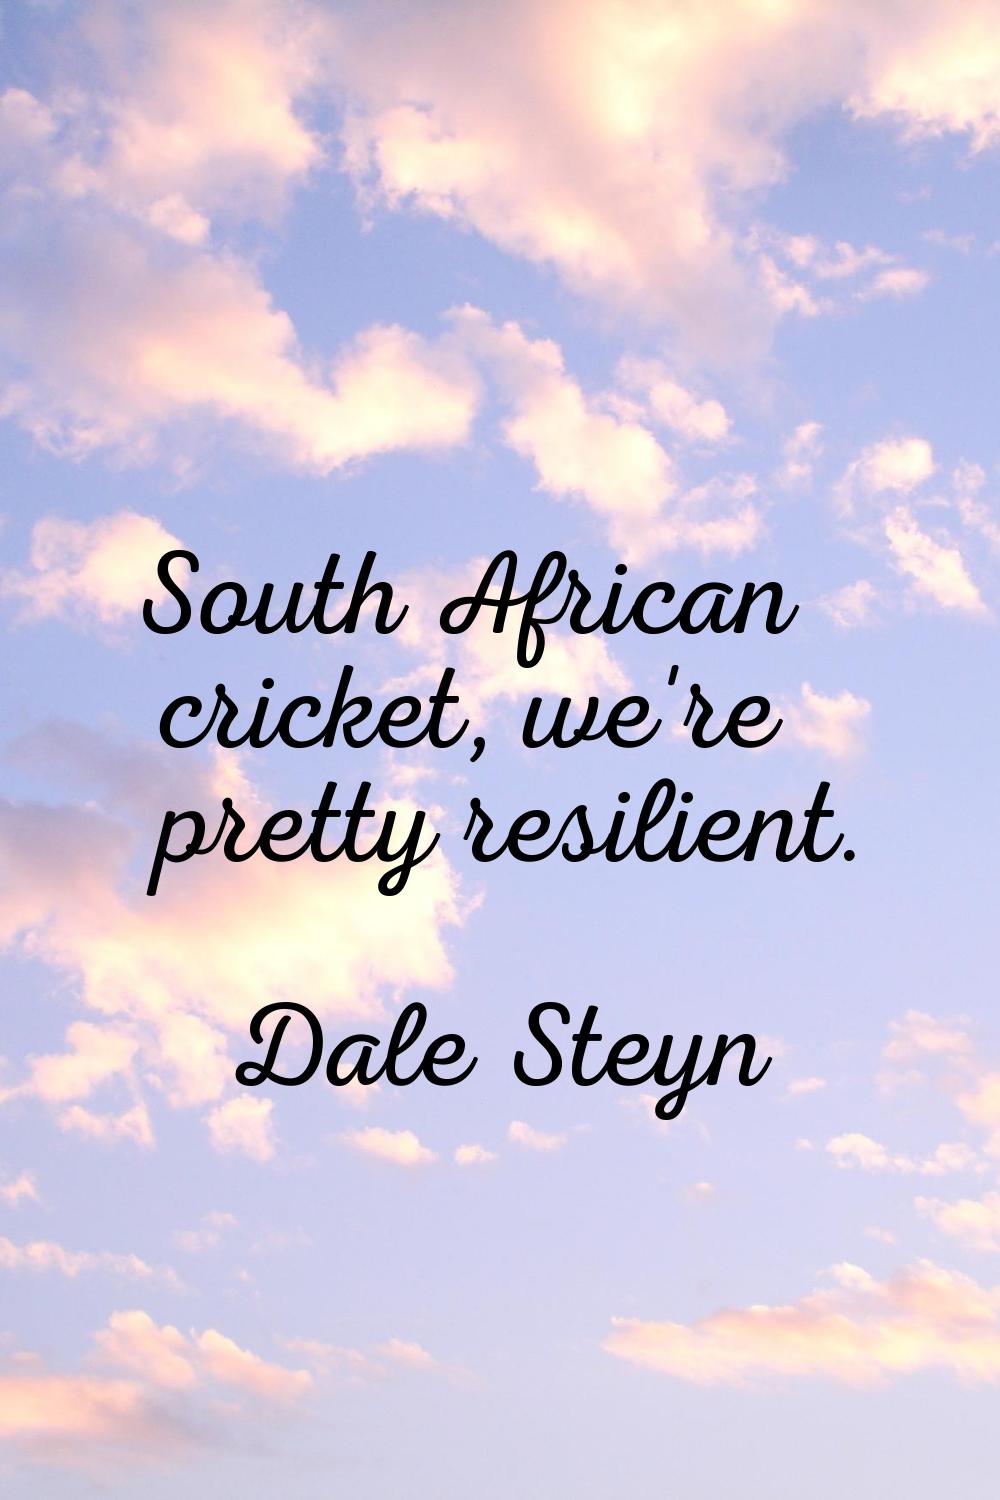 South African cricket, we're pretty resilient.